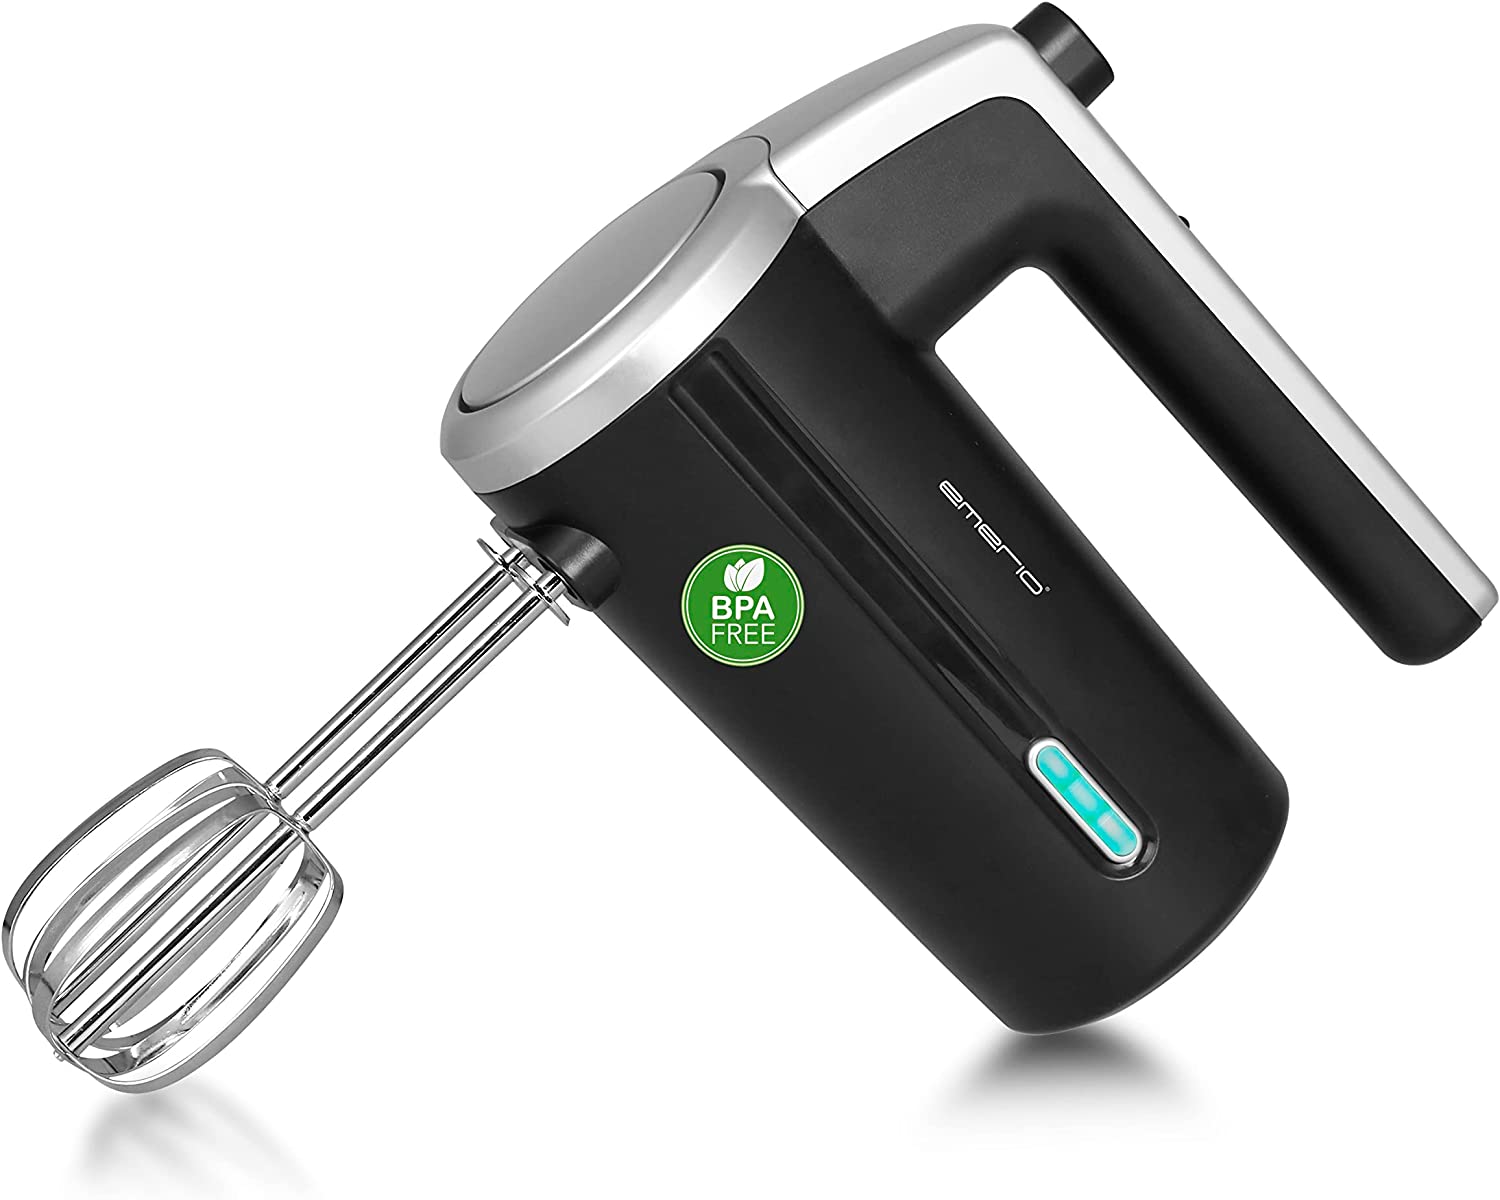 Emerio HM -126681.1 Wireless Battery Hand Mixer - 2 Stirring Rods - 3 Speeds - 2000 MAh / 7.4 V - BPA Free - Battery Level Indicator - USB Charging Cable - Up to 10 Cycles at 3 Minutes